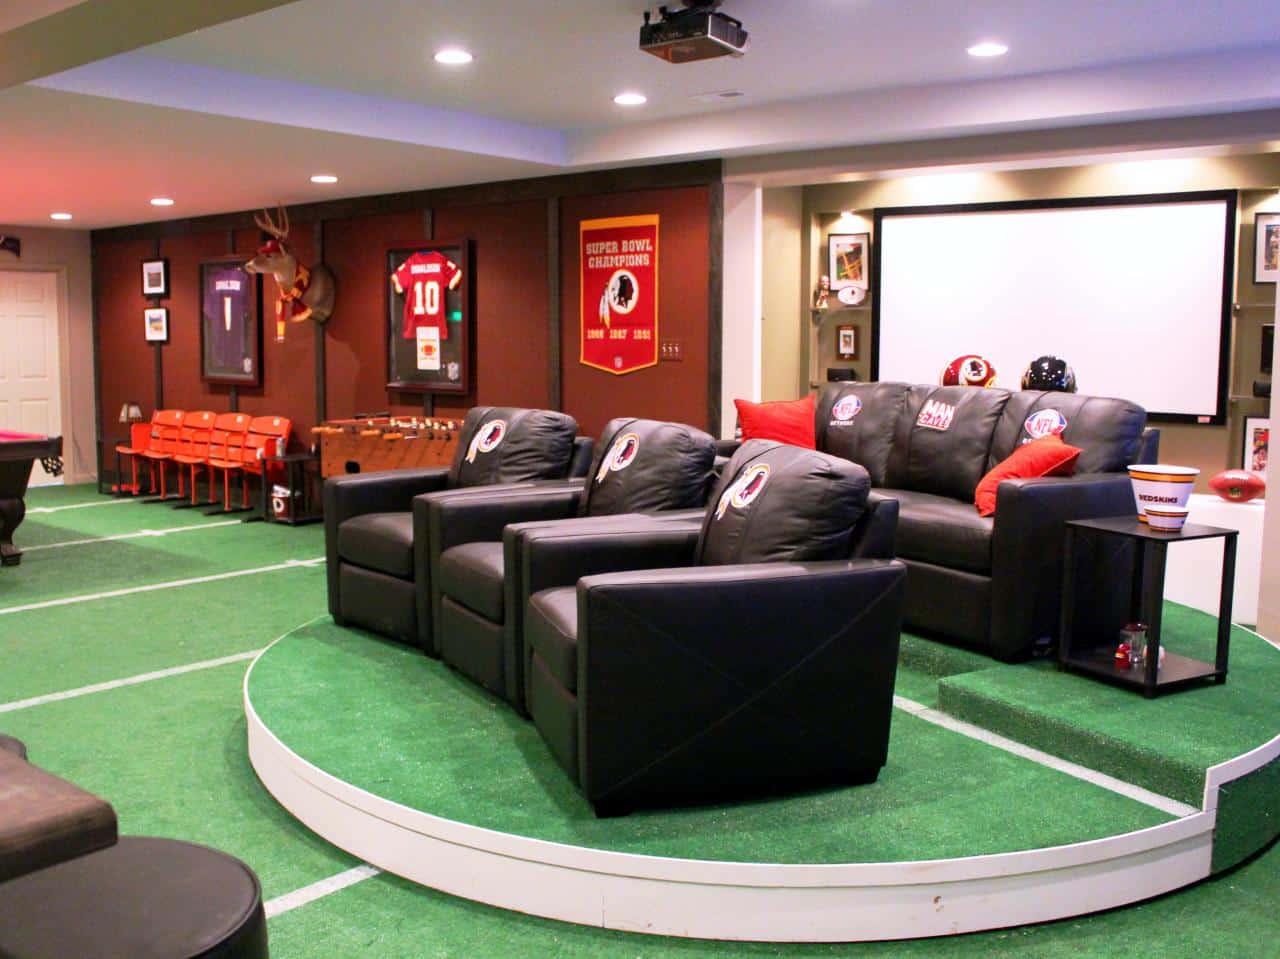 Indoor Sports: Here's Why Artificial Turf Makes Sense